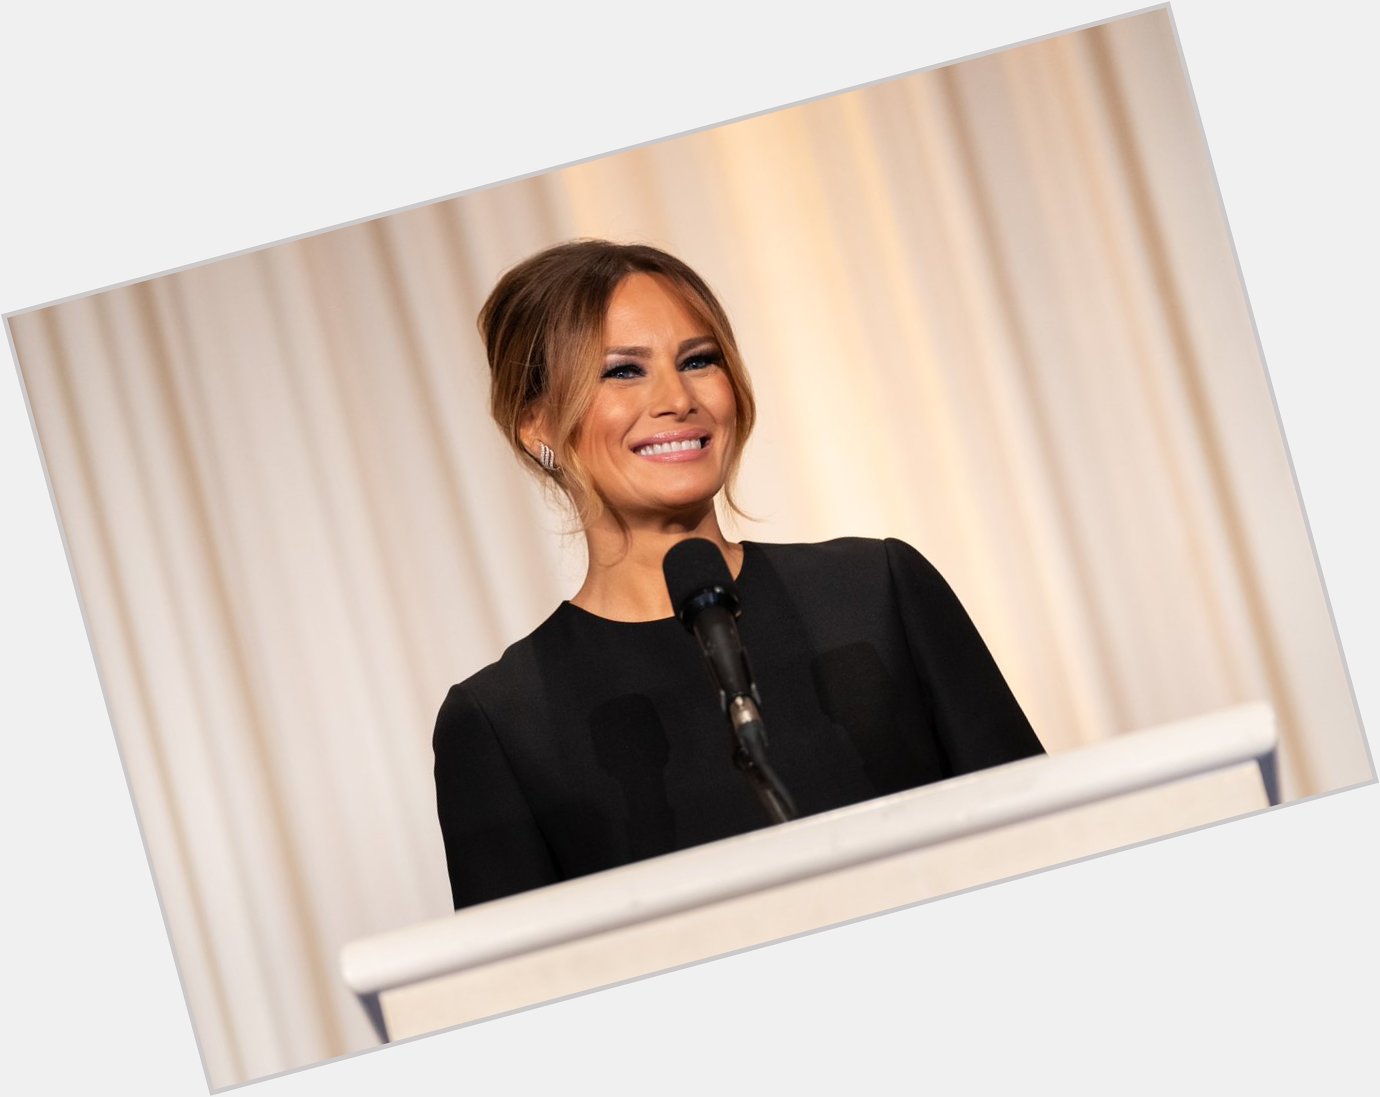 Happy Birthday, Melania Trump! Thank you for your unwavering support. 